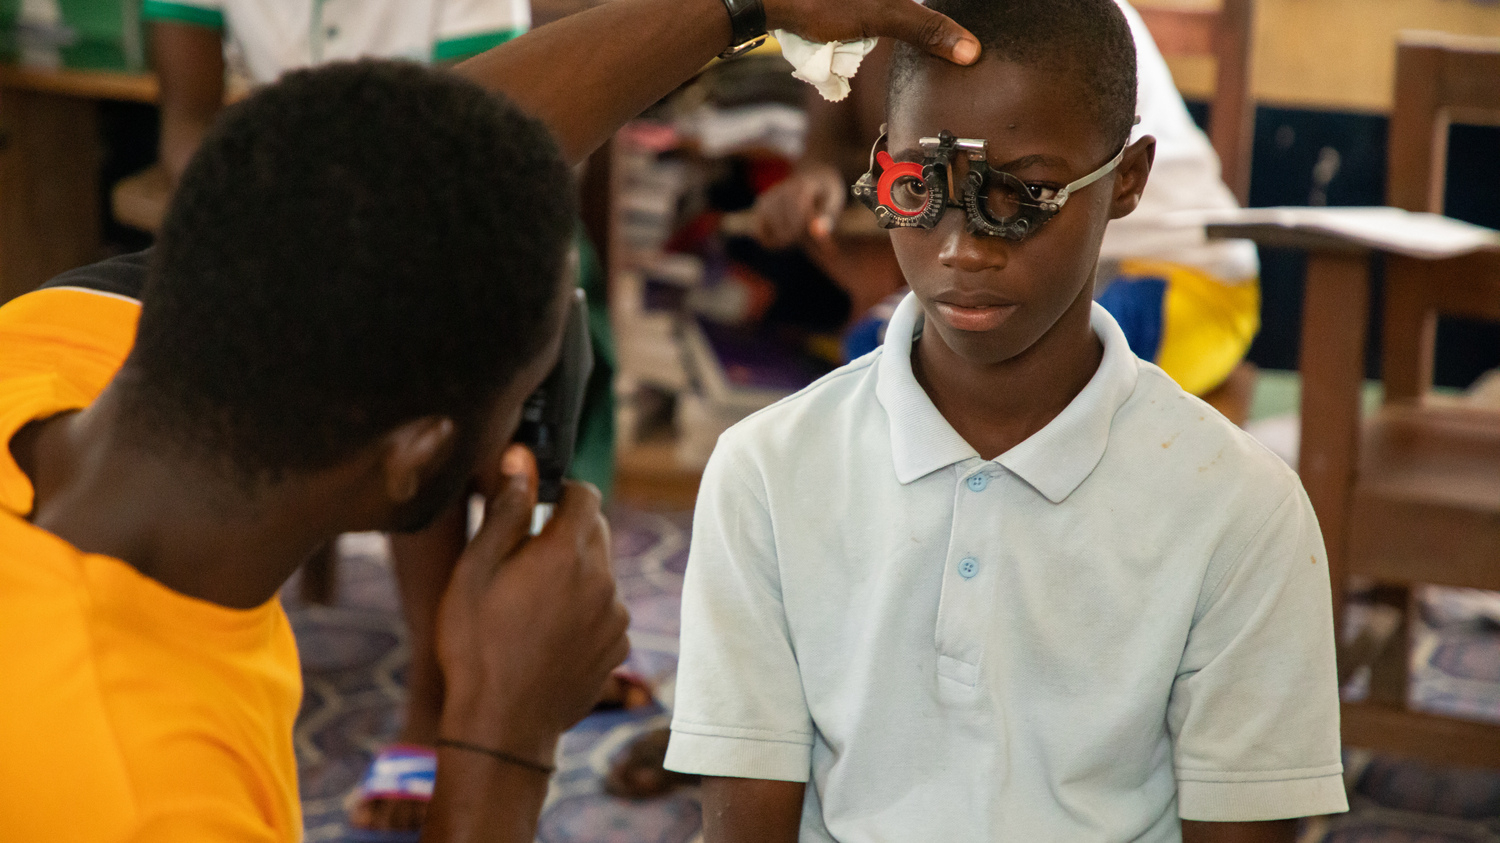 A boy has his eyes screened by a health worker. The boy is wearing a special pair of glasses, and the doctor is examining his eyes.